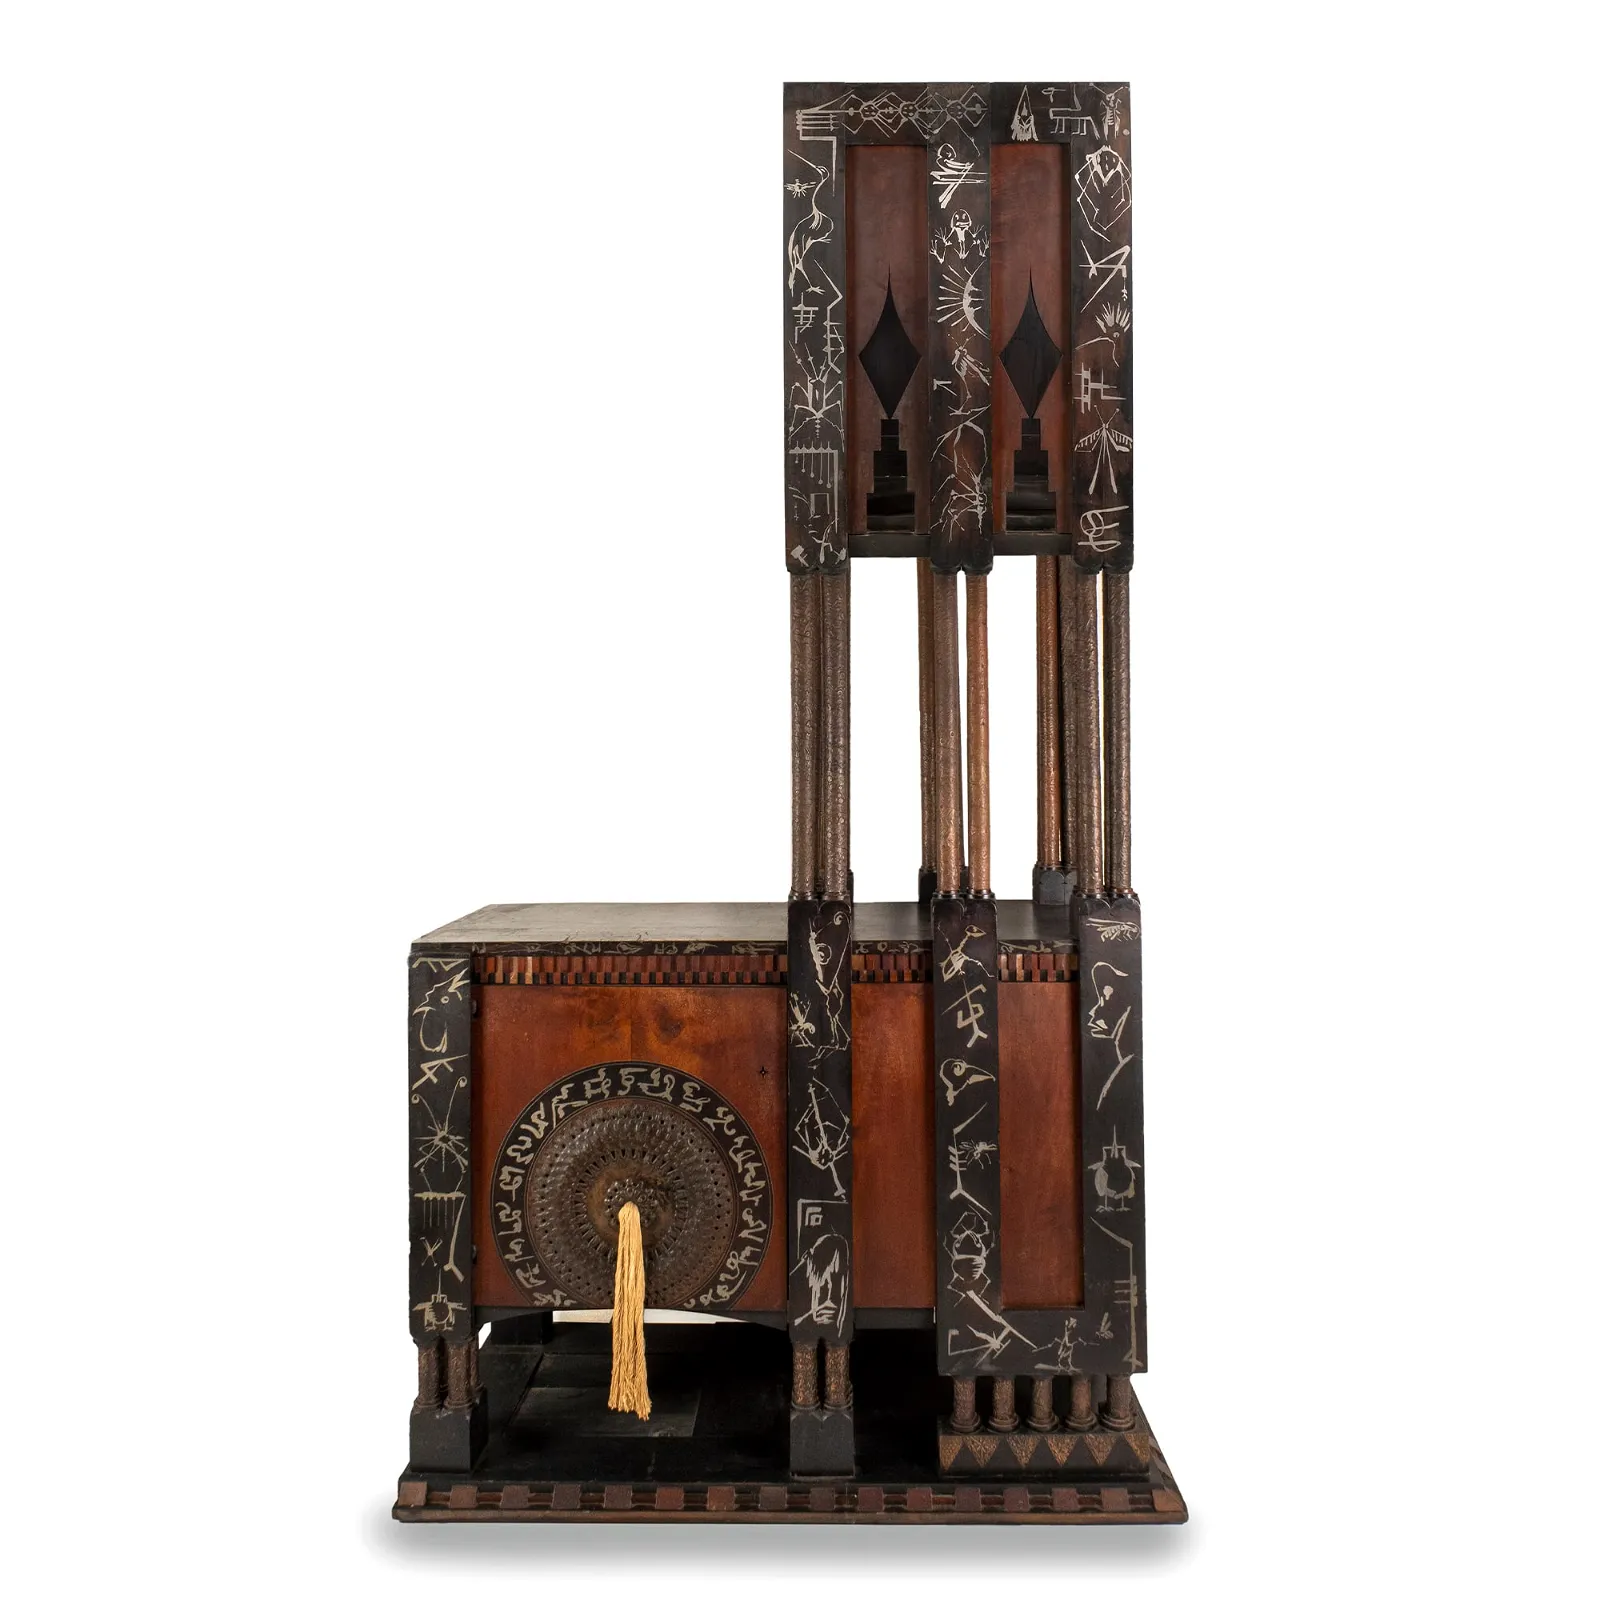 Two-piece ebonized cabinet by Carlo Bugatti, which sold for €15,000 ($16,240, or $21,110 with buyer’s premium) at Bolli & Romiti.